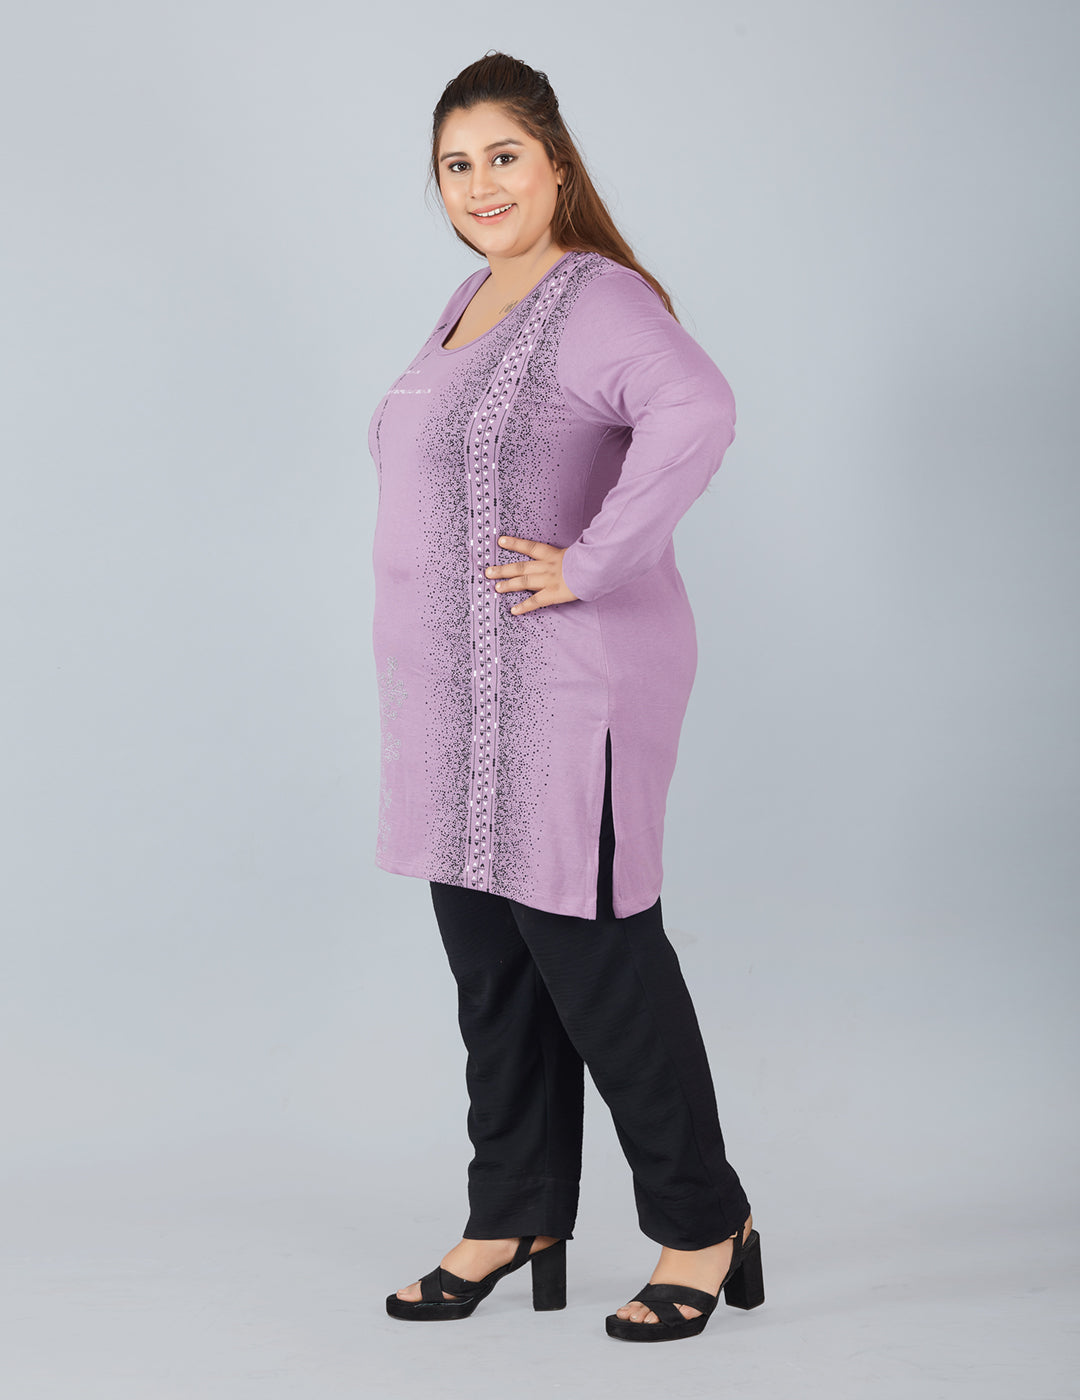 Cotton Long Top for Women Plus Size - Full Sleeves - Lavender